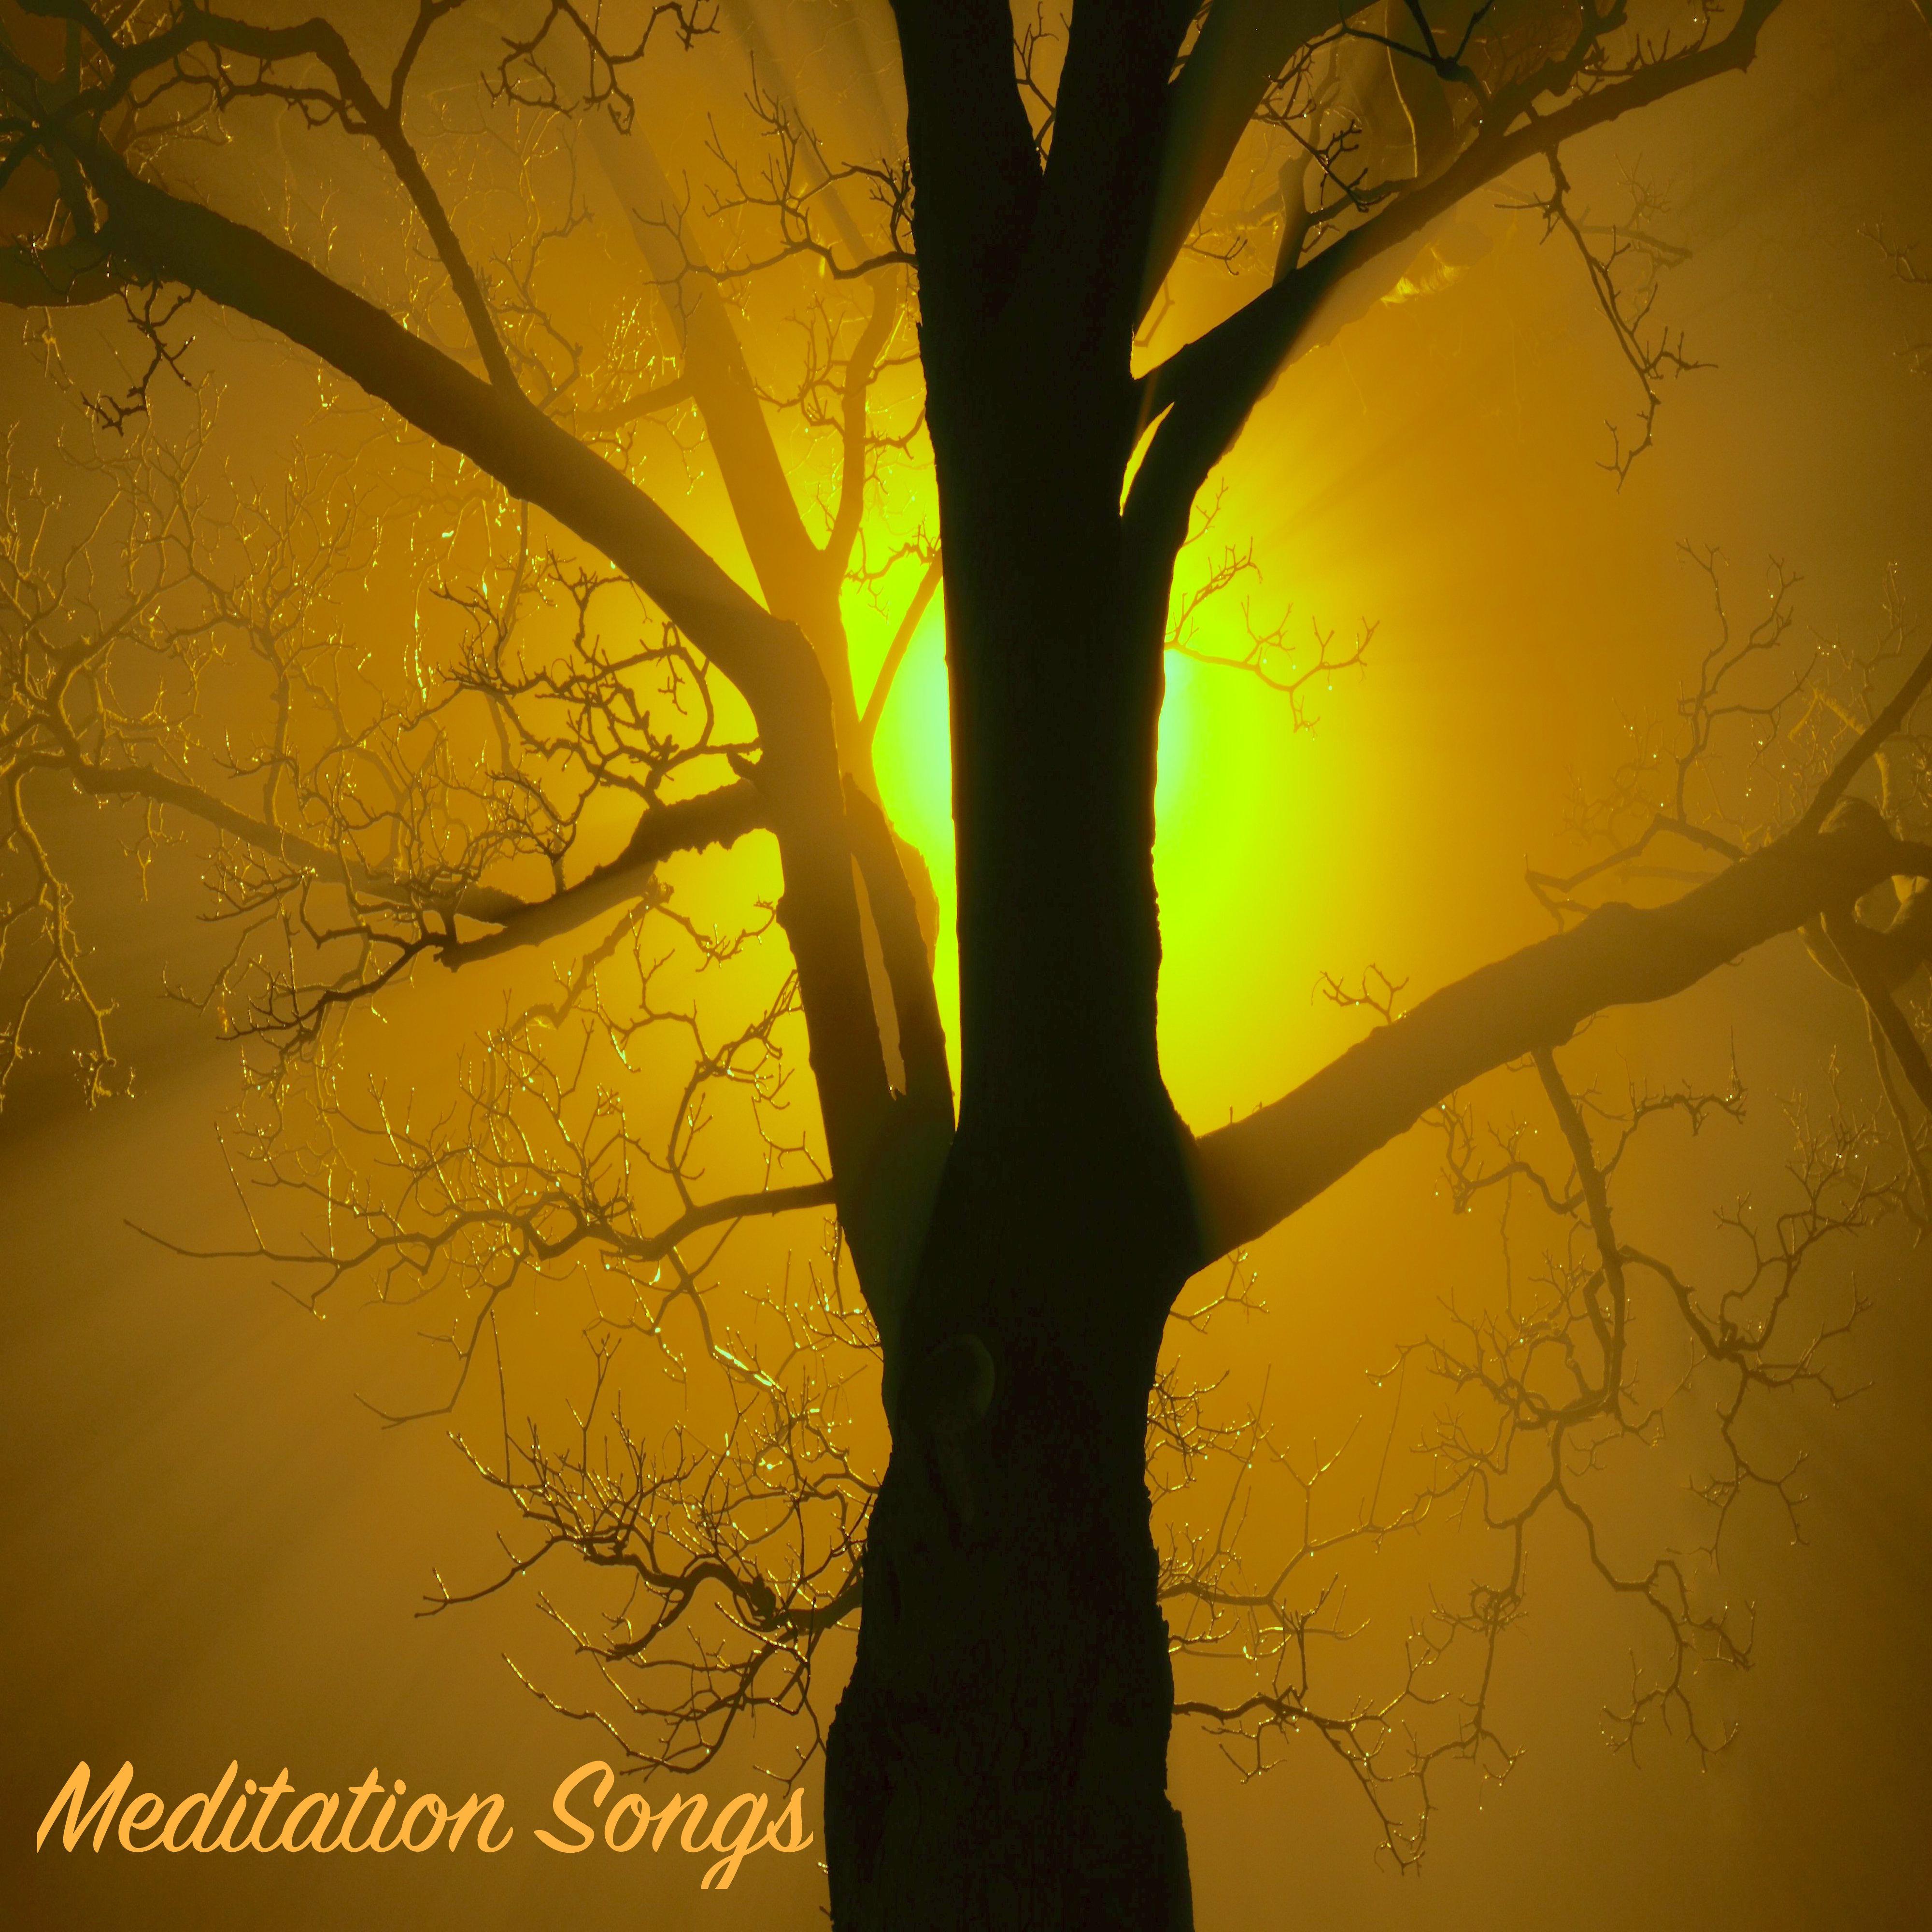 Meditation Songs for Relaxing Moments at Spa - Sounds for Body Massage, Intense Relaxation, Yoga Lessons